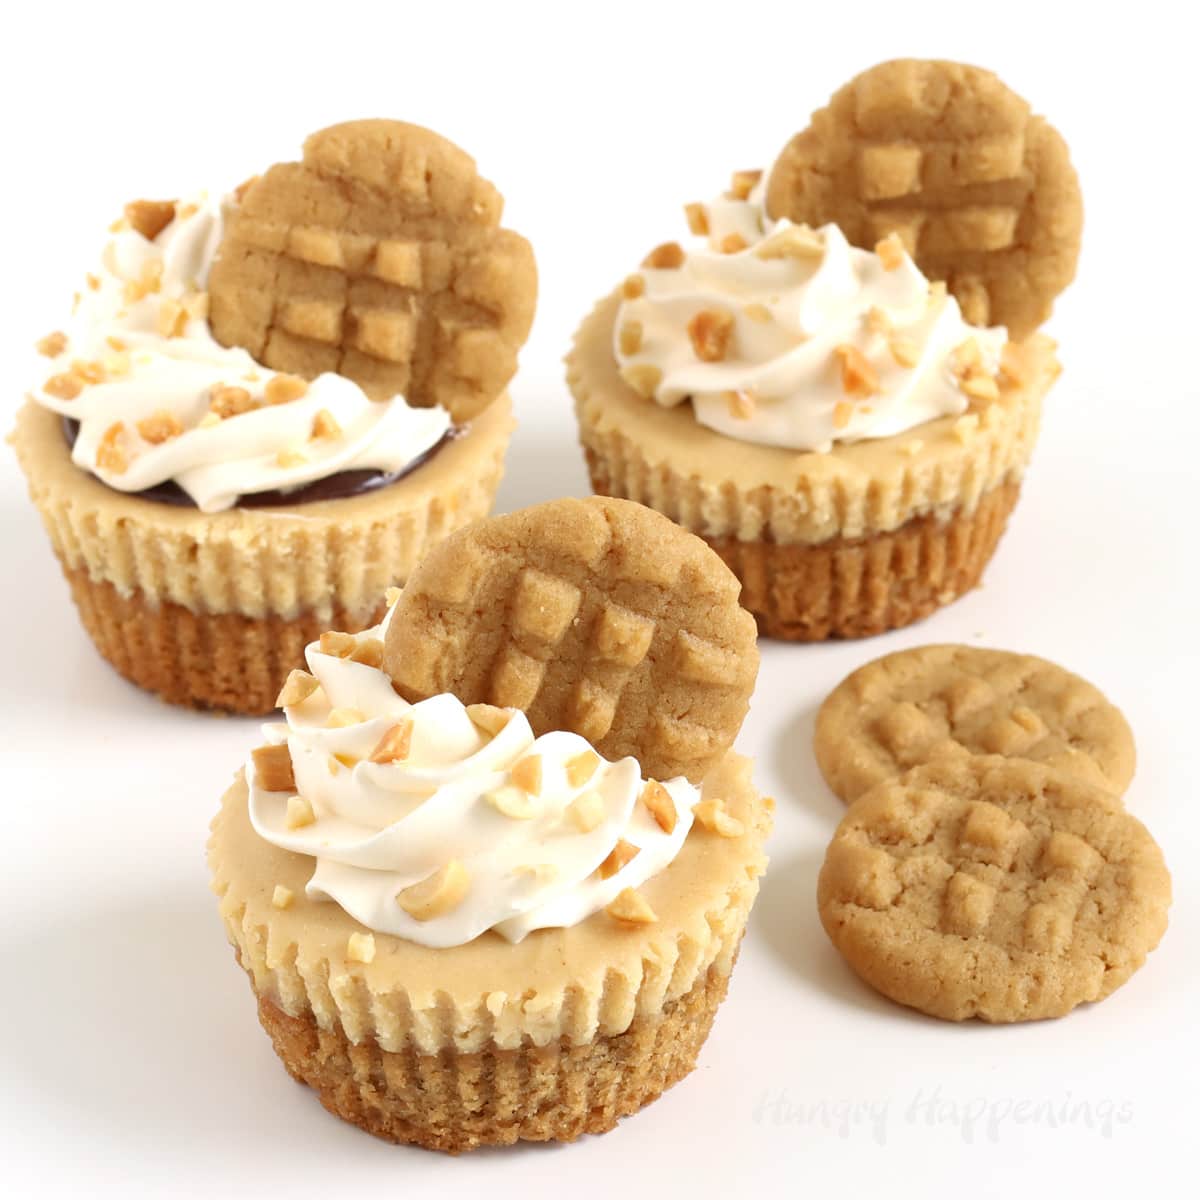 Mini peanut butter cheesecakes topped with whipped cream, chopped nuts, and mini peanut butter cookies.